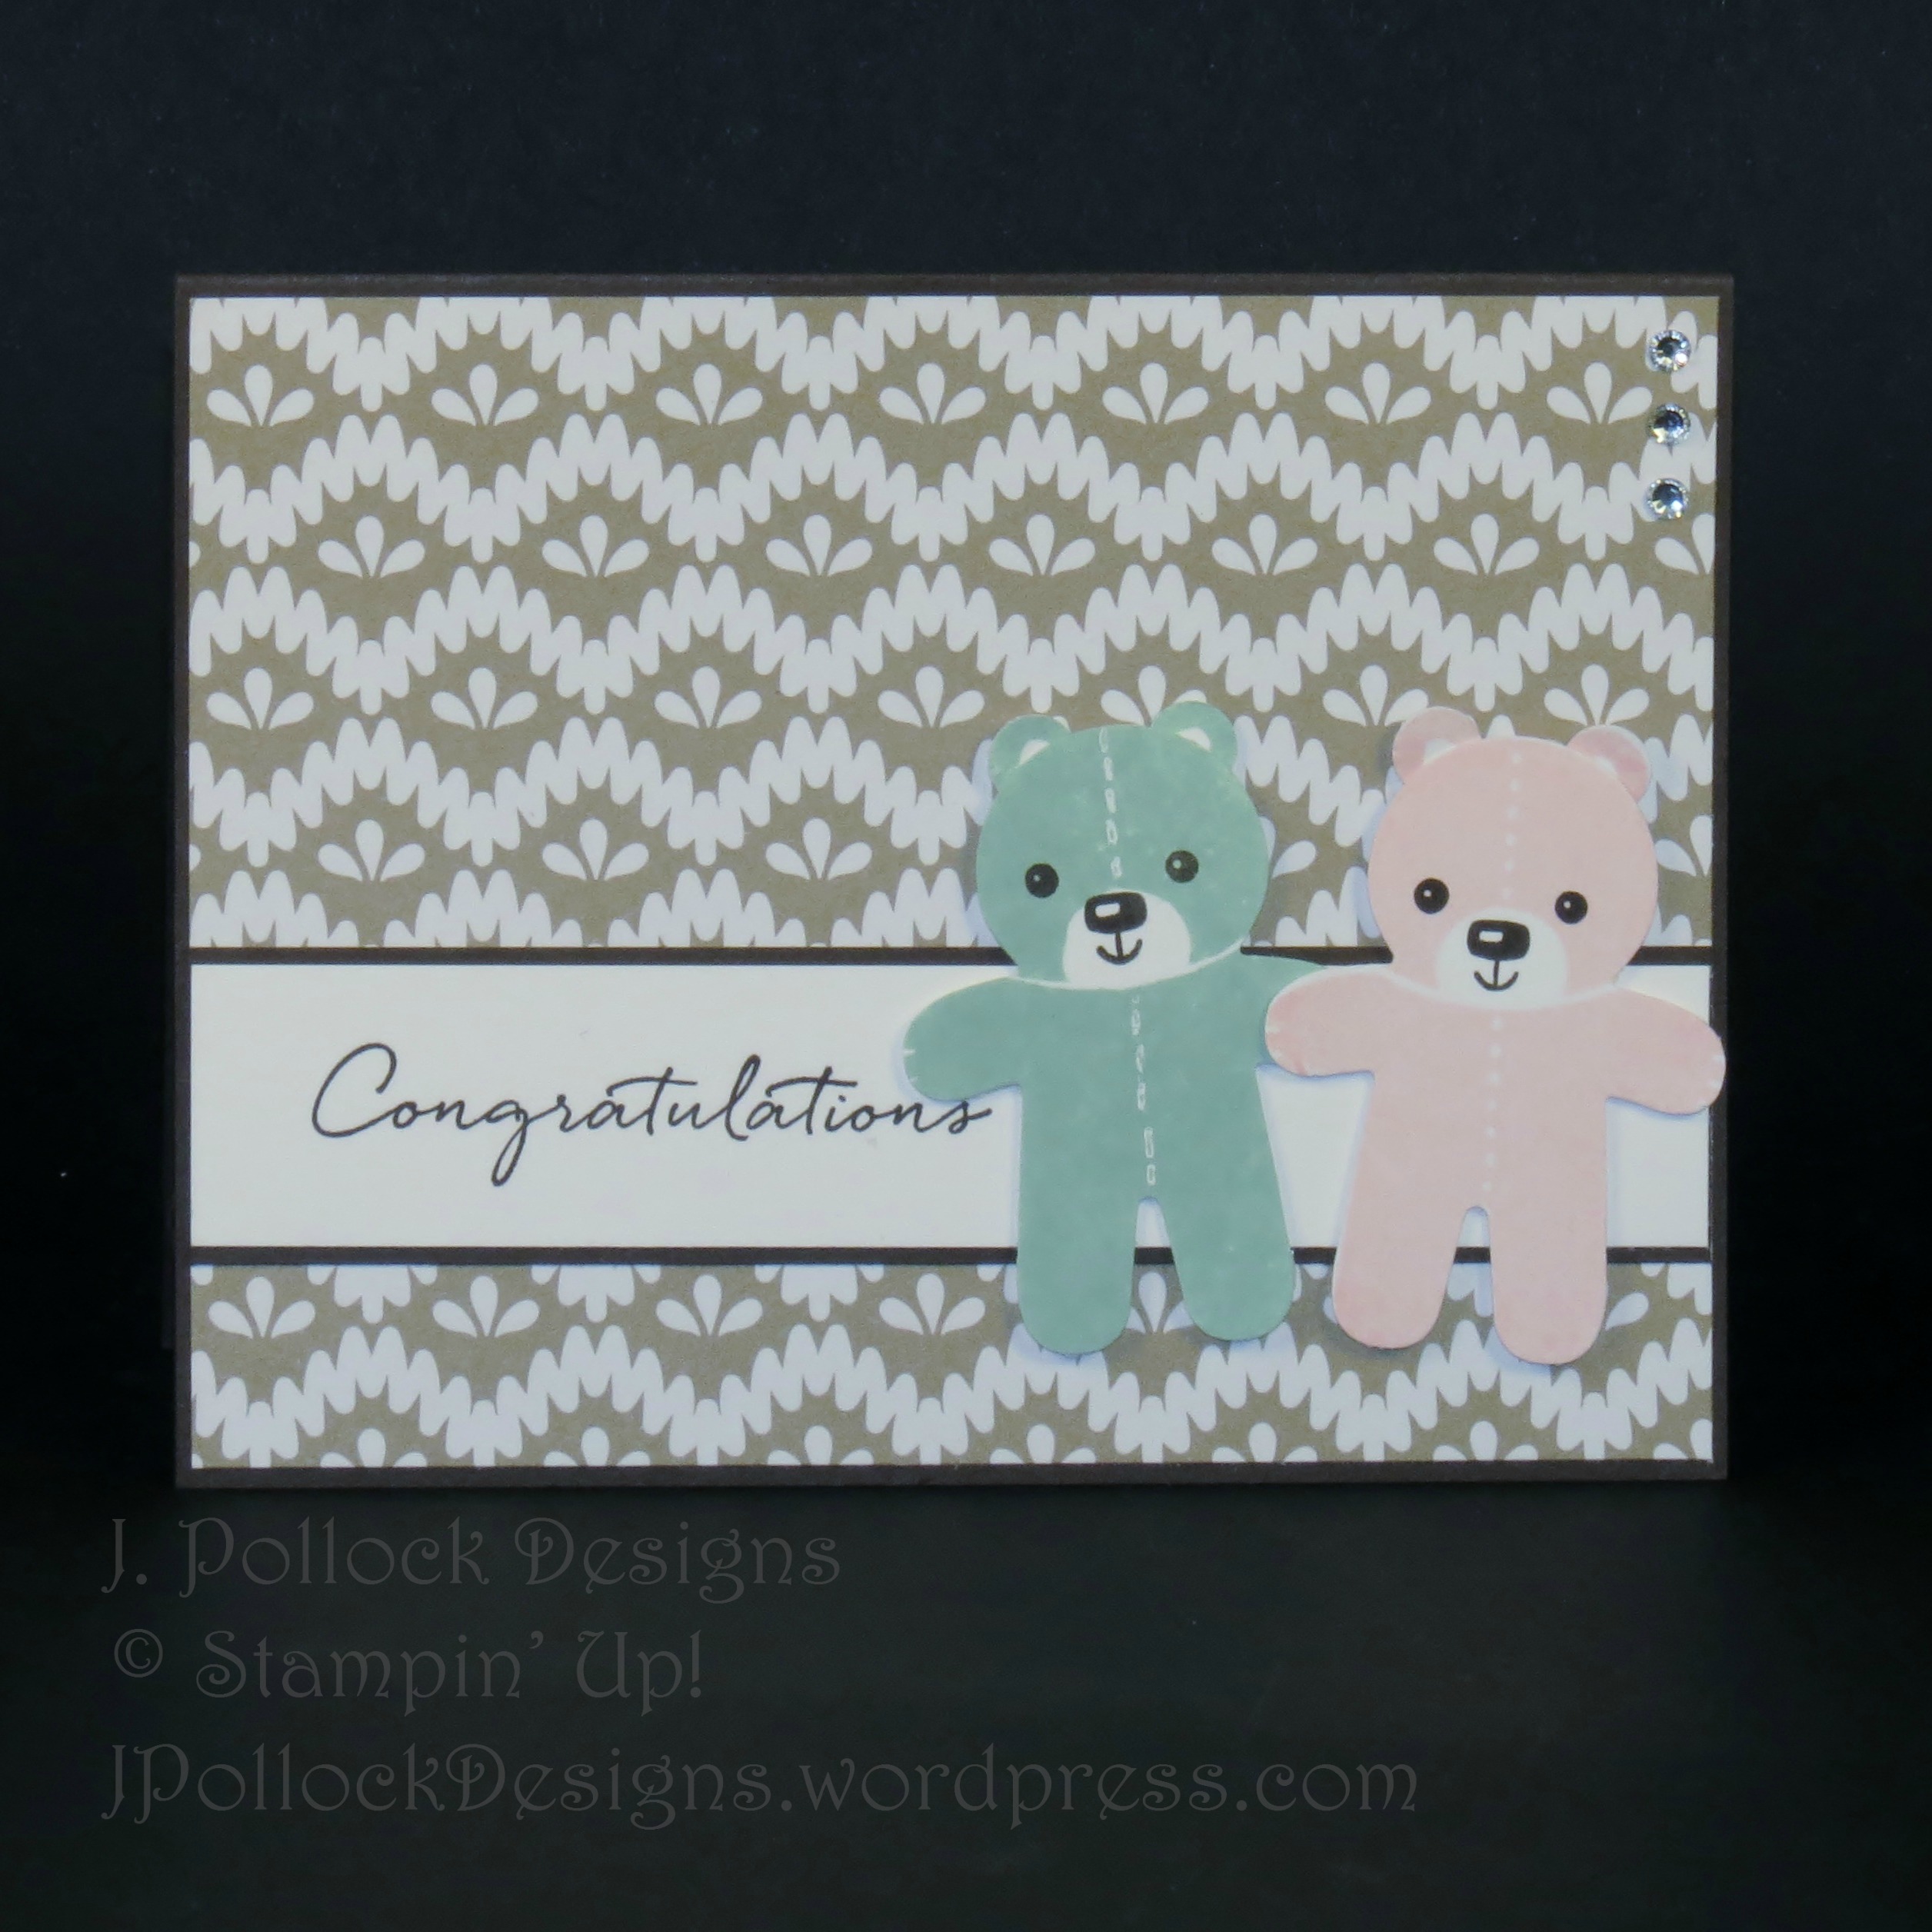 J. Pollock Designs – Cookie Cutter Christmas, baby card